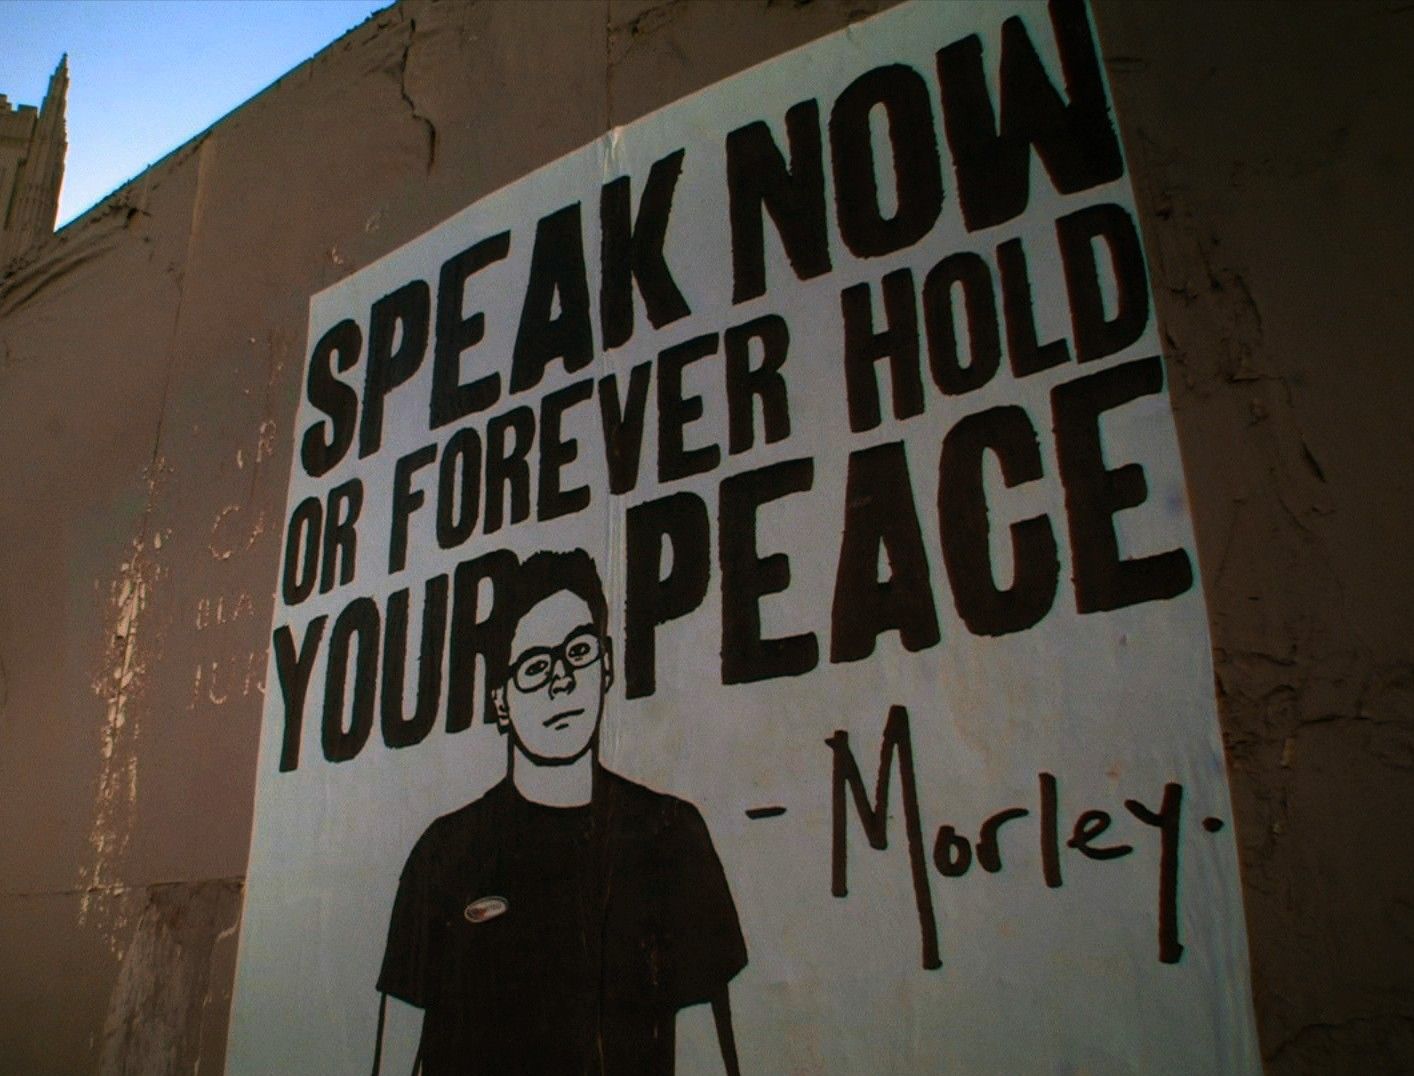 Speak Now or Forever Hold Your Peace poster - Morley